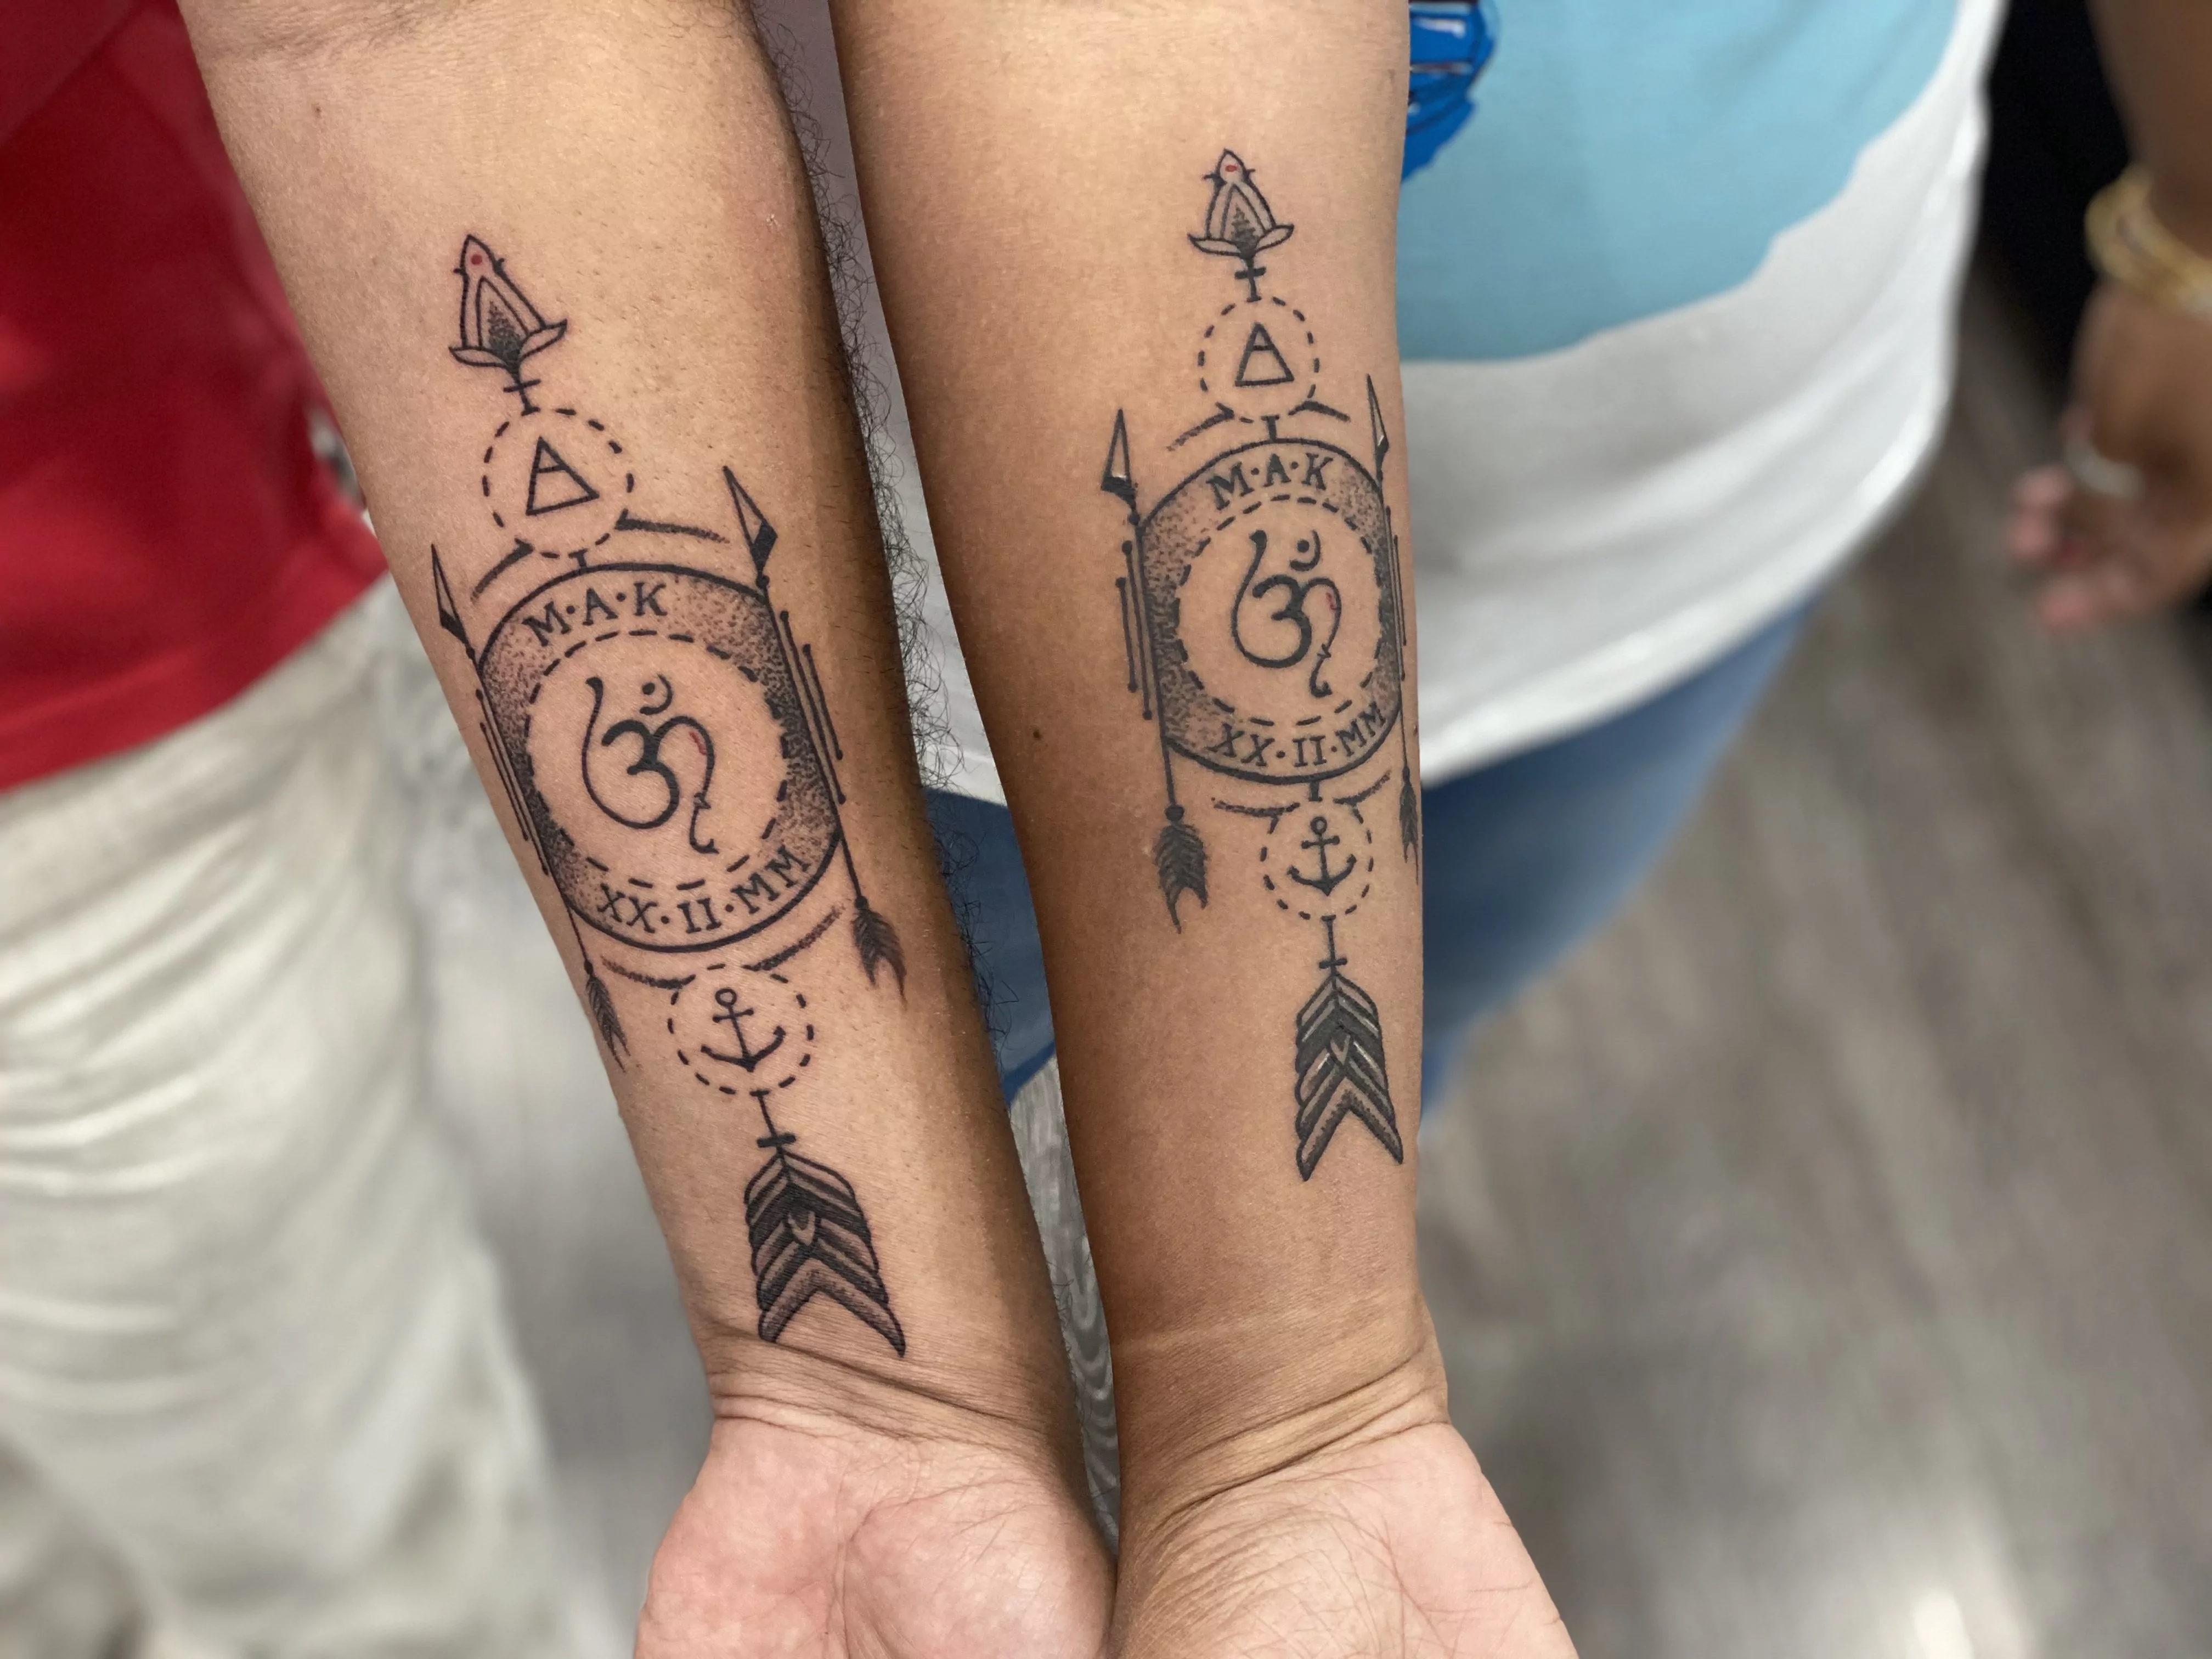 Tattoo uploaded by Vipul Chaudhary  Couple tattoo Tattoo for couples Couples  tattoo ideas  Tattoodo